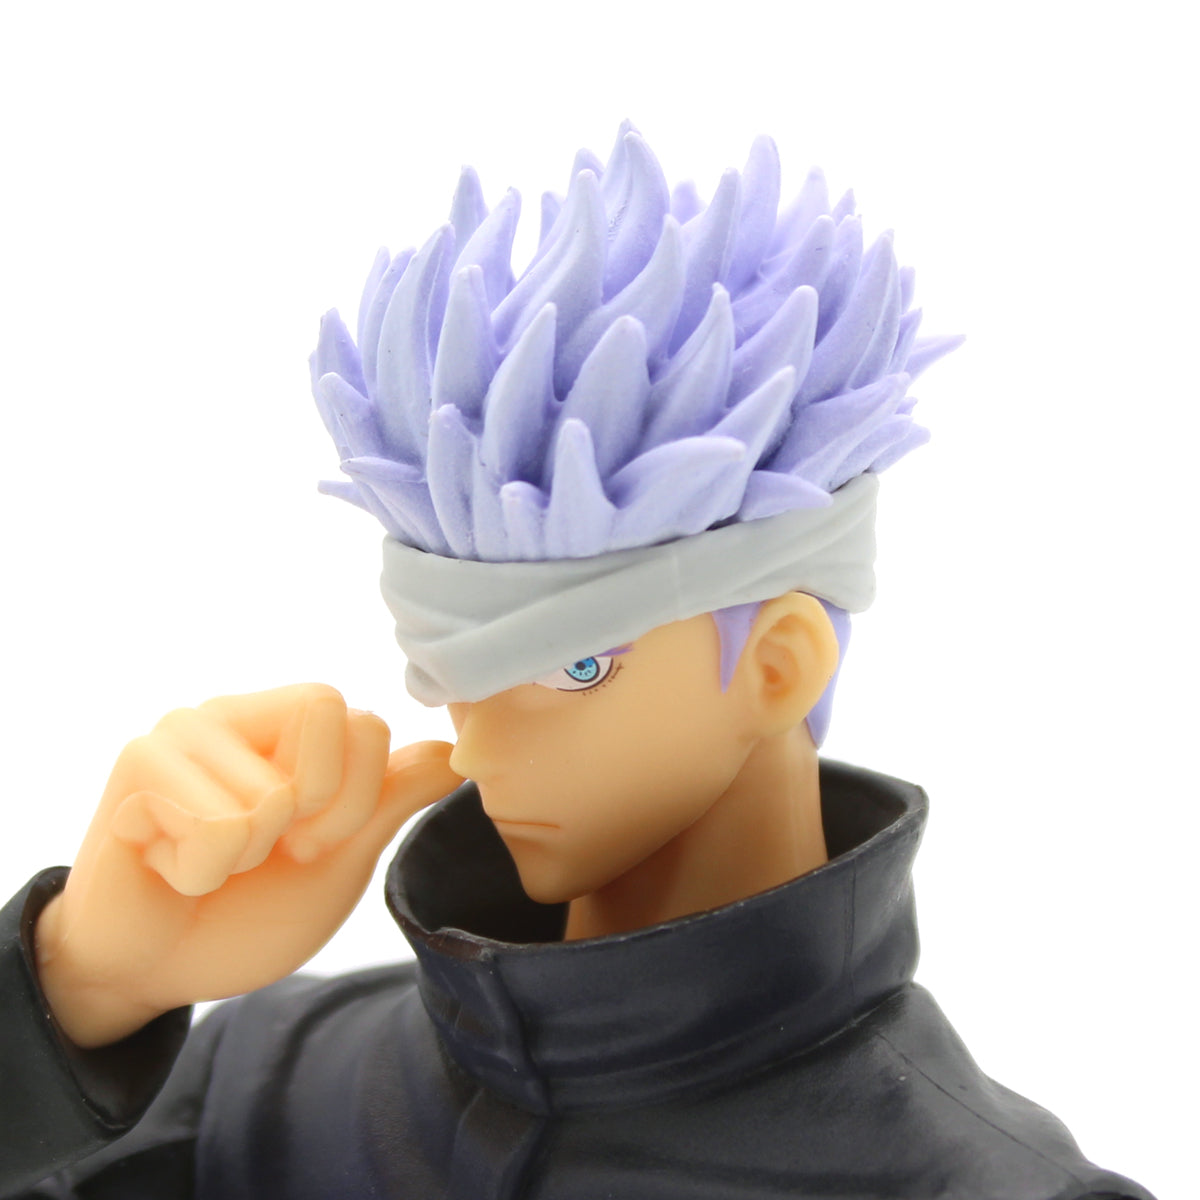 Jujutsu Kaisen Products Figures Accessories section